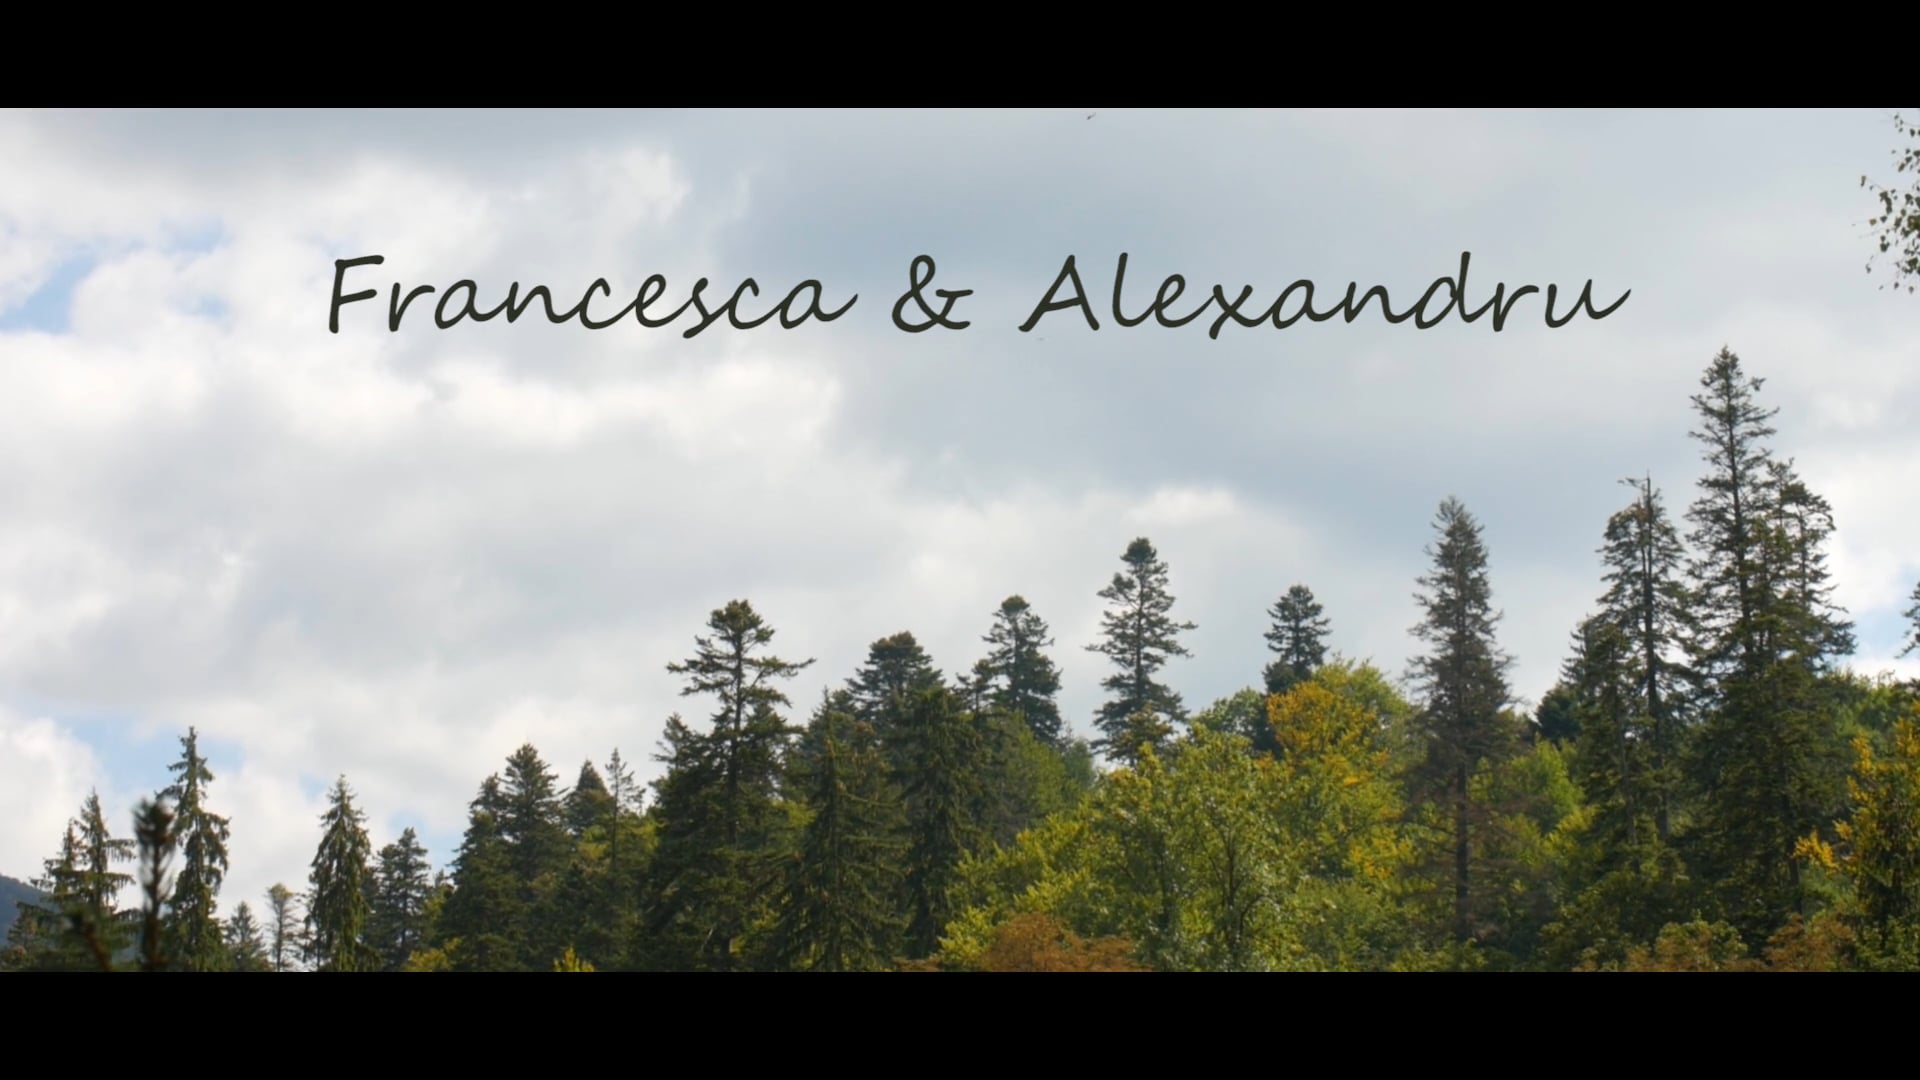 Two hearts beating as one - Francesca & Alexandru